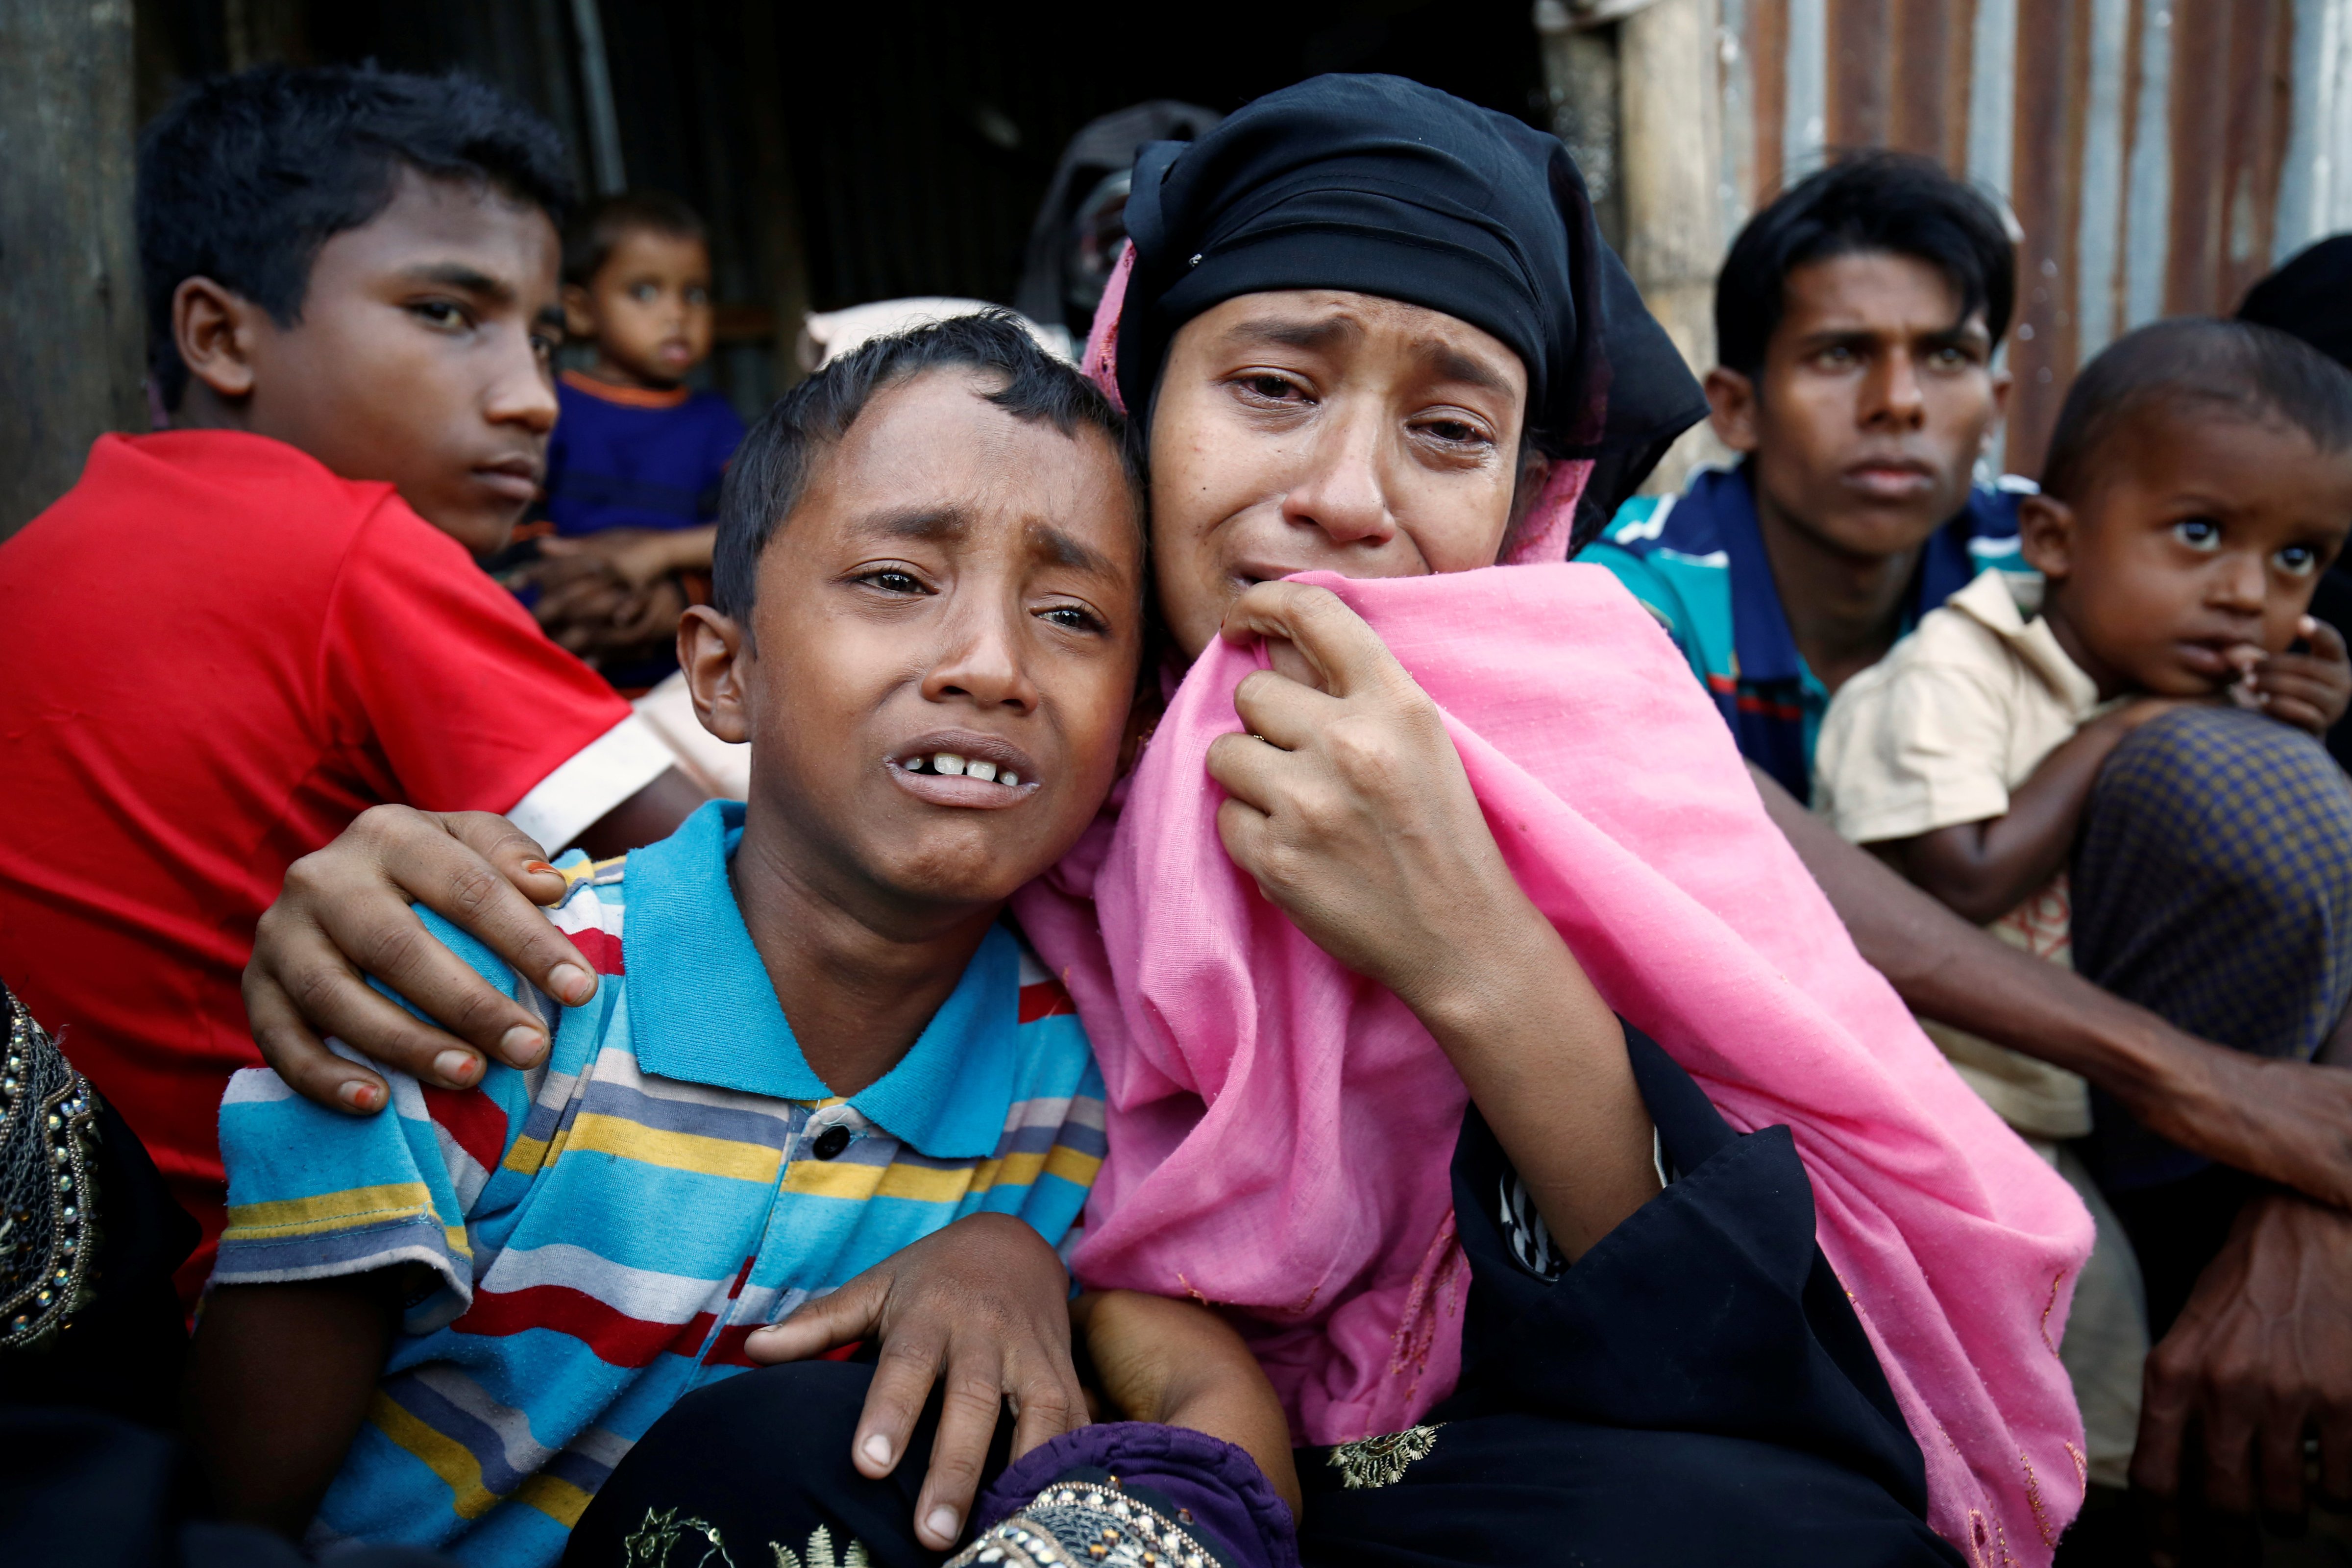 A Rohingya Muslim woman and her son cry after being caught by Border Guard Bangladesh while illegally crossing at a border check point in Coxs Bazar